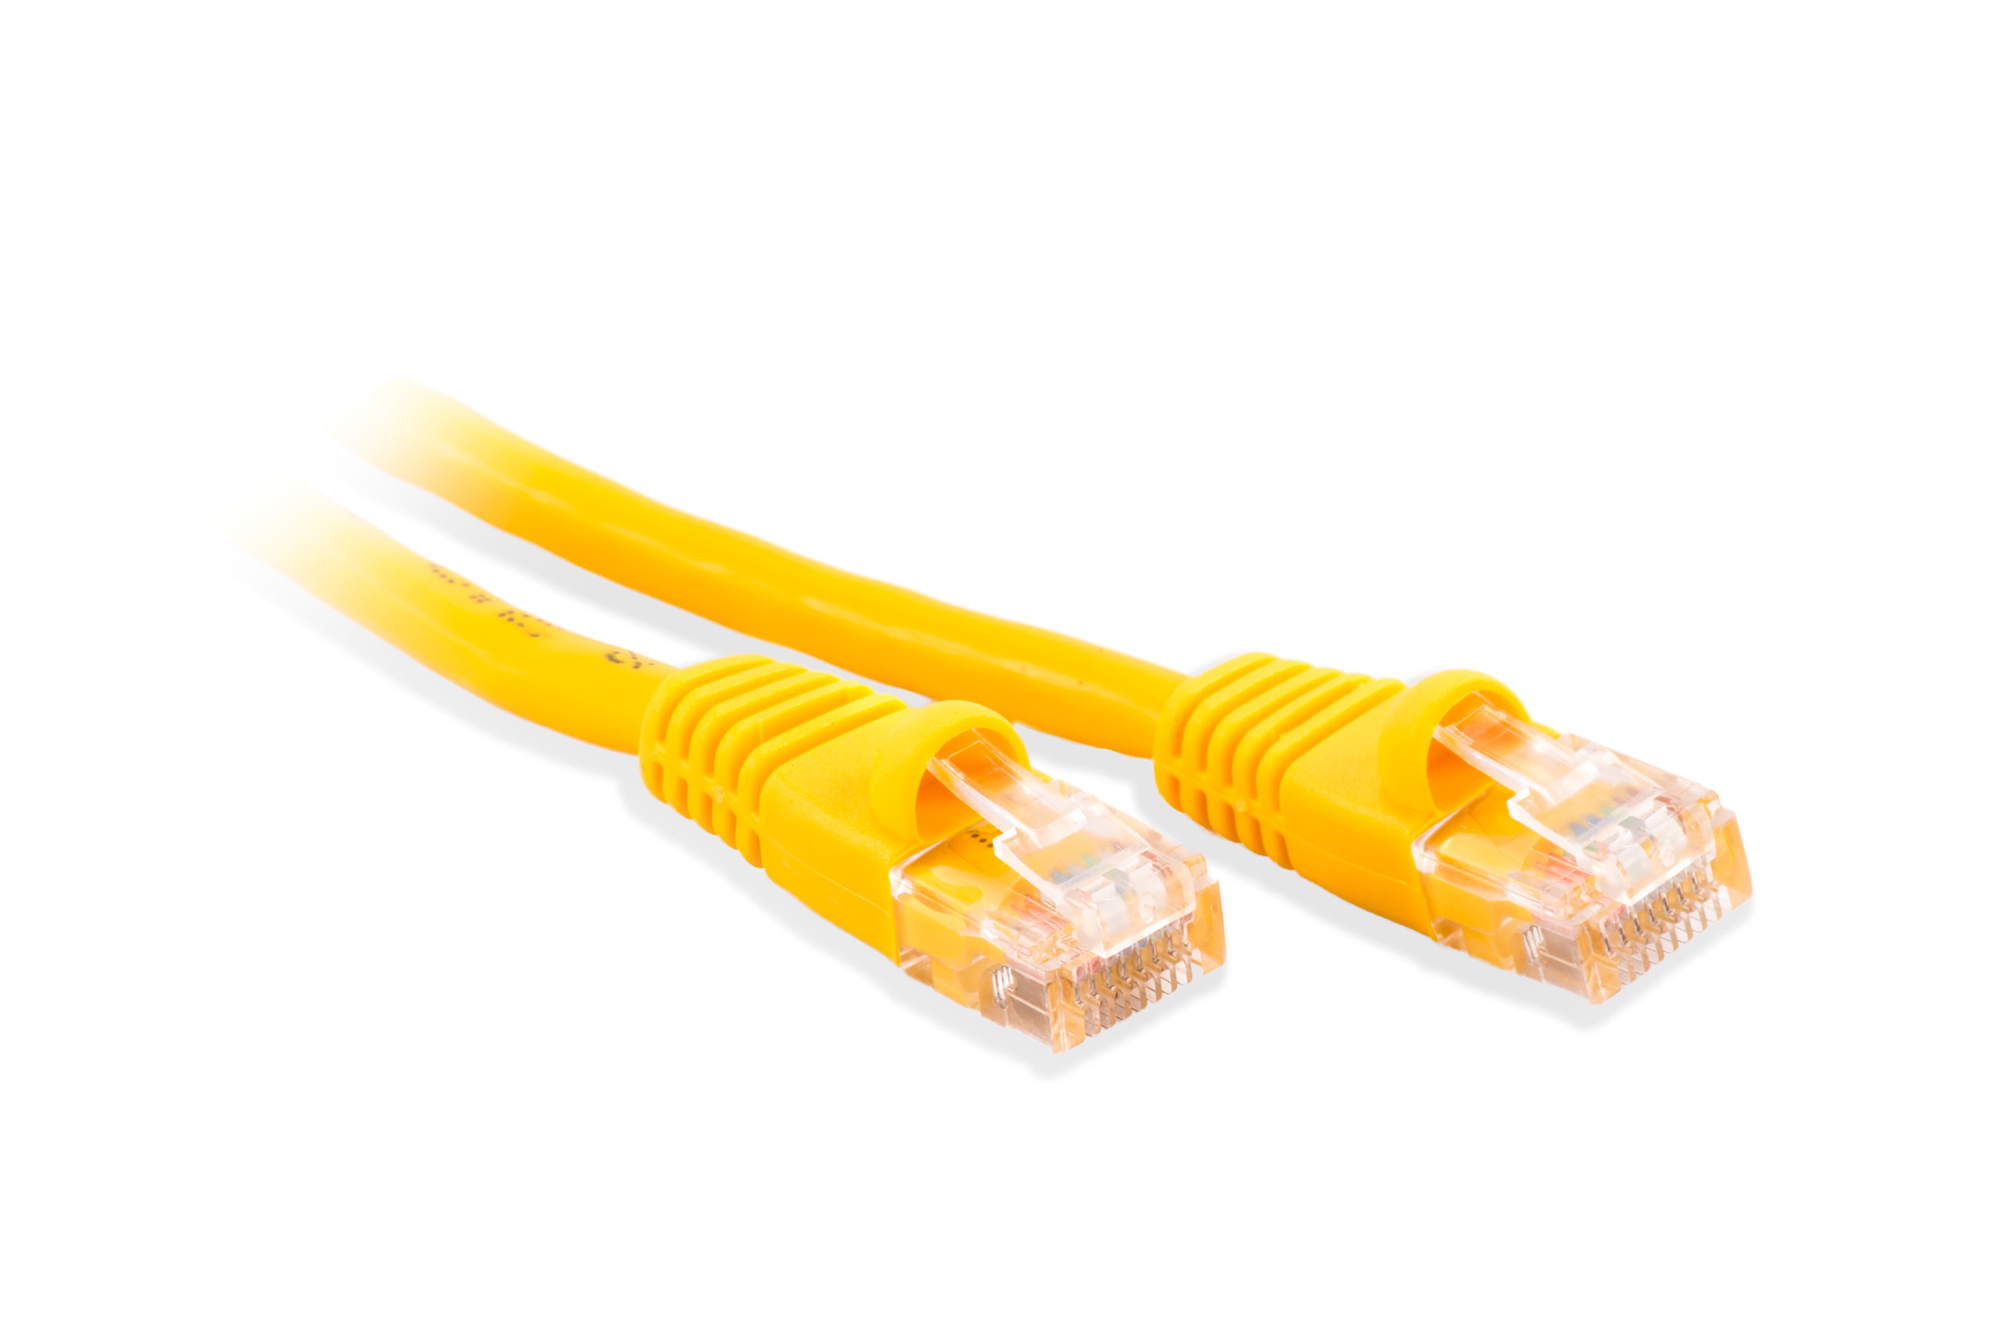 14ft Cat5e Ethernet Patch Cable - Yellow Color - Snagless Boot, Stranded, RJ45, 350Mhz, 24AWG